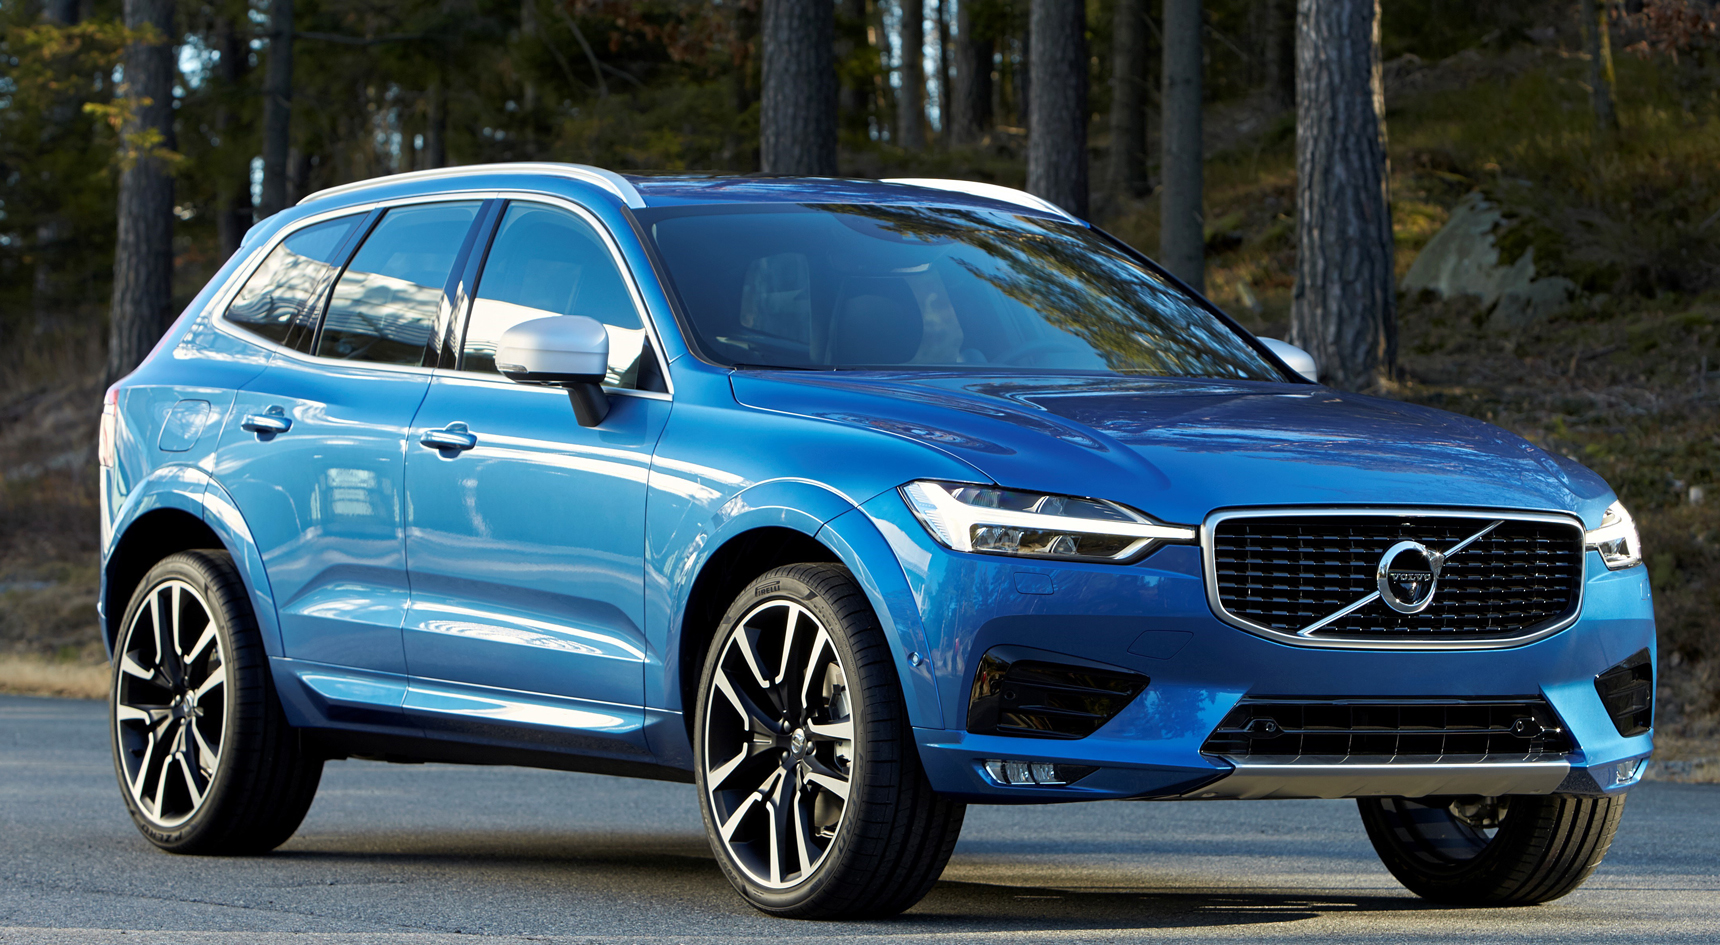 The Volvo XC60 rises to victory.